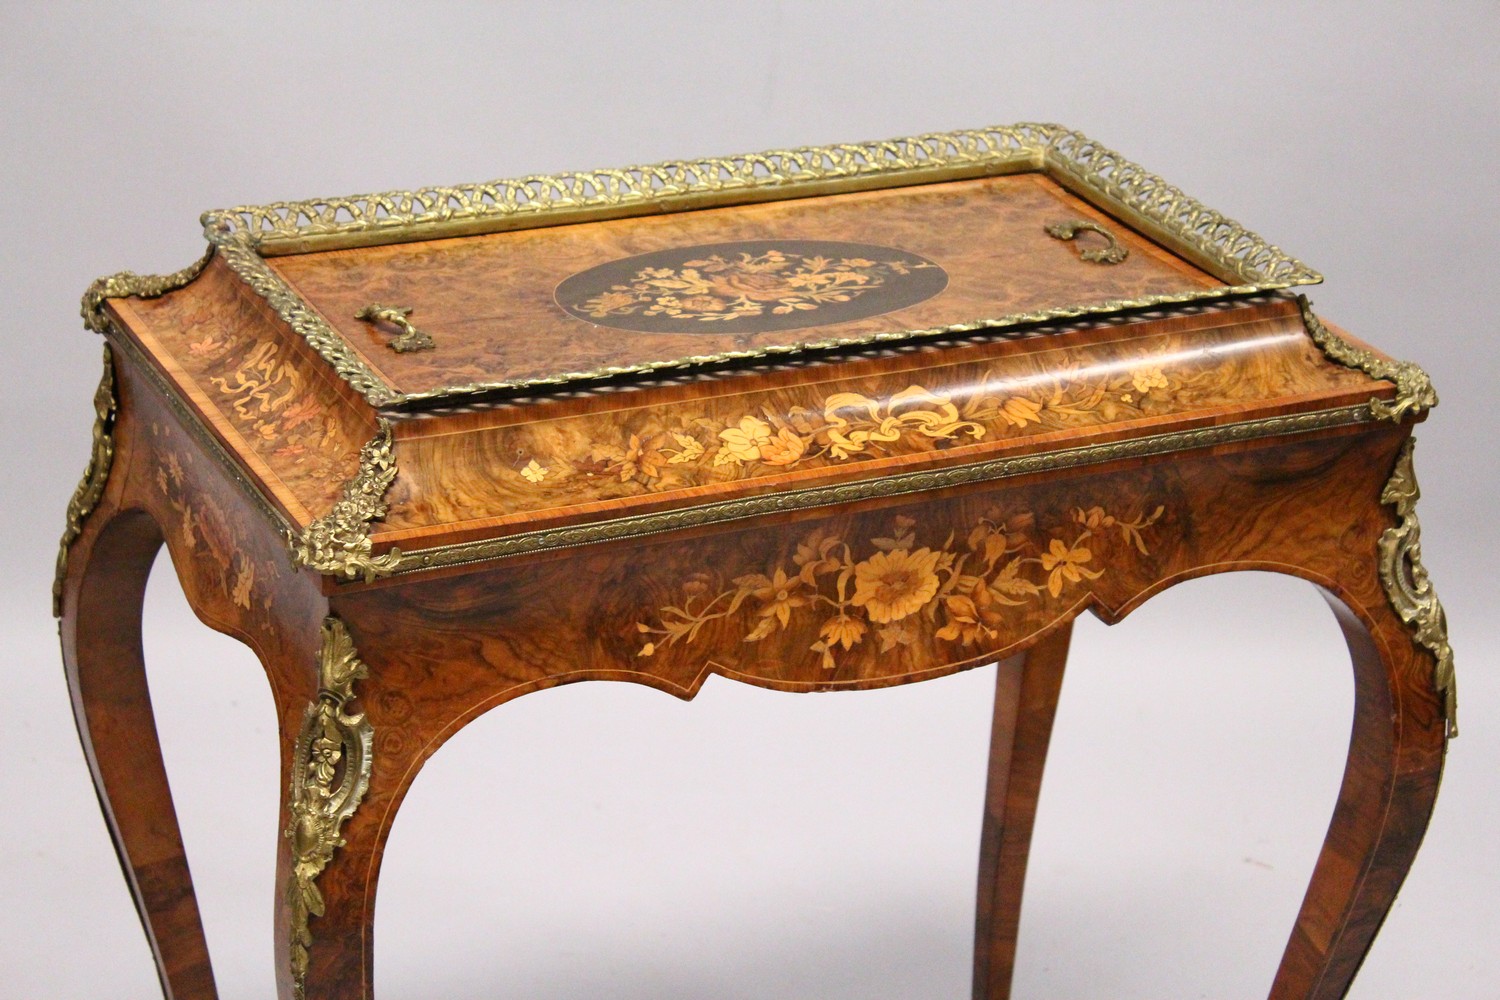 A 19TH CENTURY BURR WALNUT, ORMOLU AND MARQUETRY JARDINIERE, with removable cover, zinc liner, on - Image 2 of 10